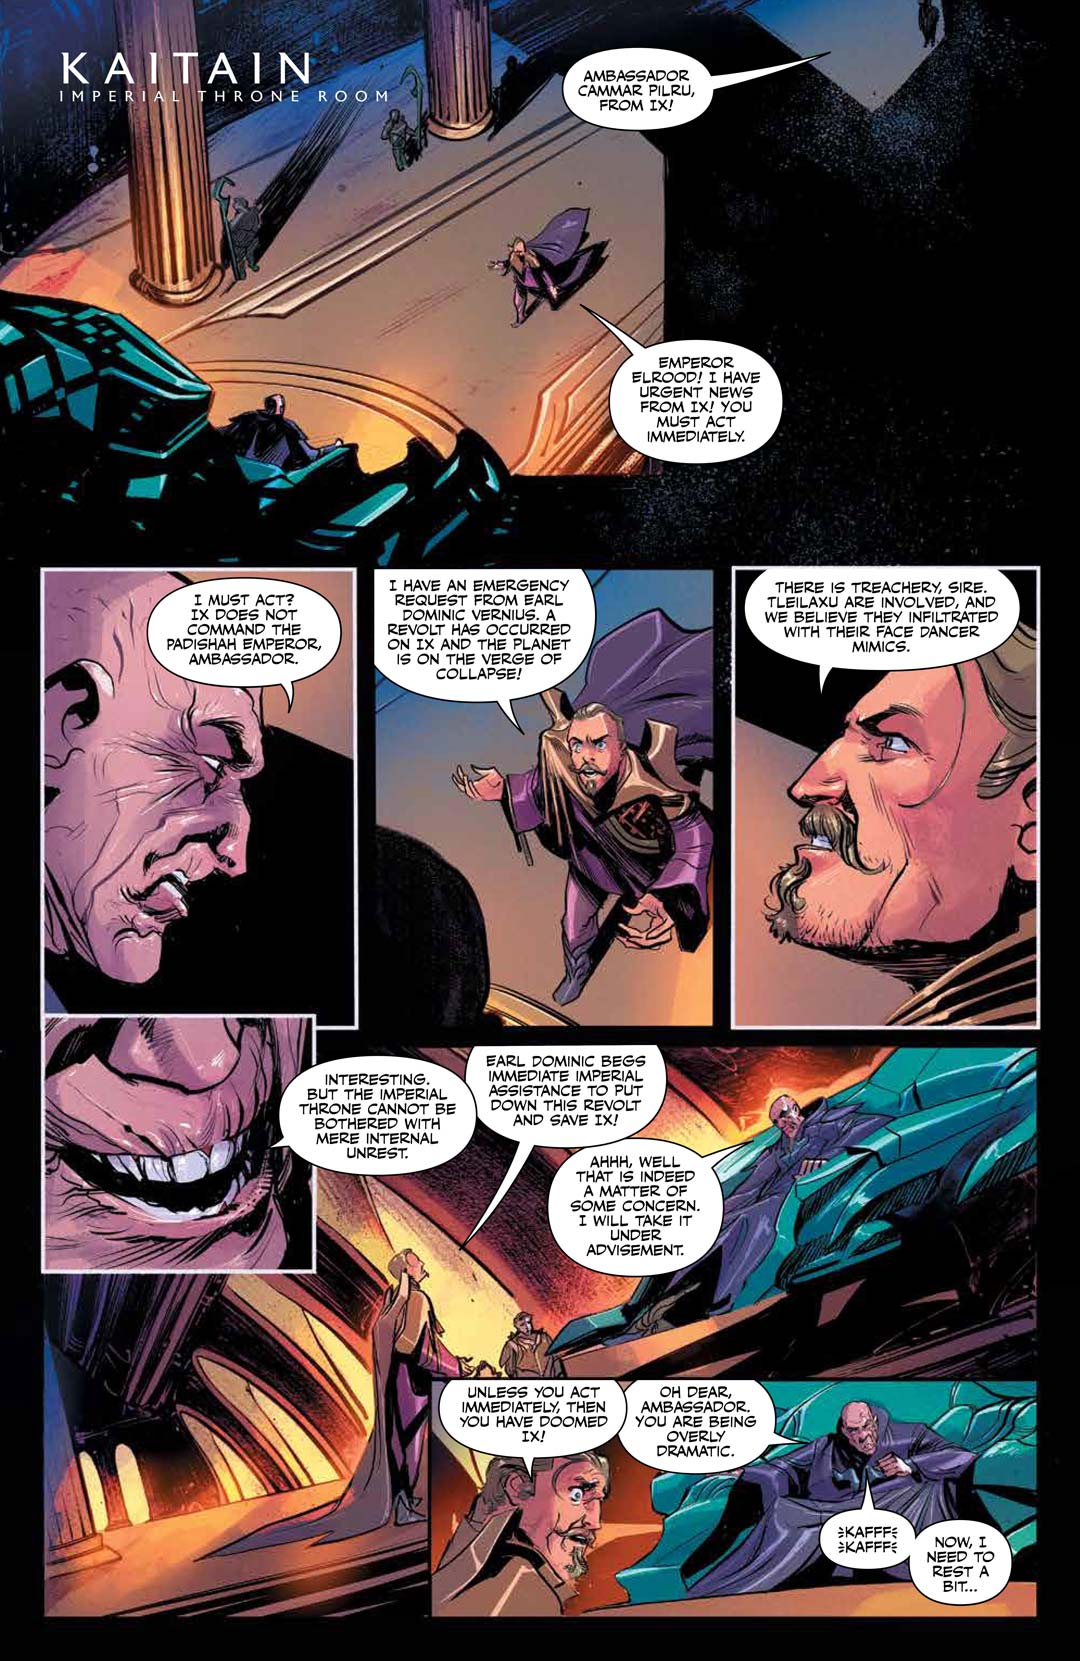 Dune: House Atreides comic series. Issue #6, preview page 3.